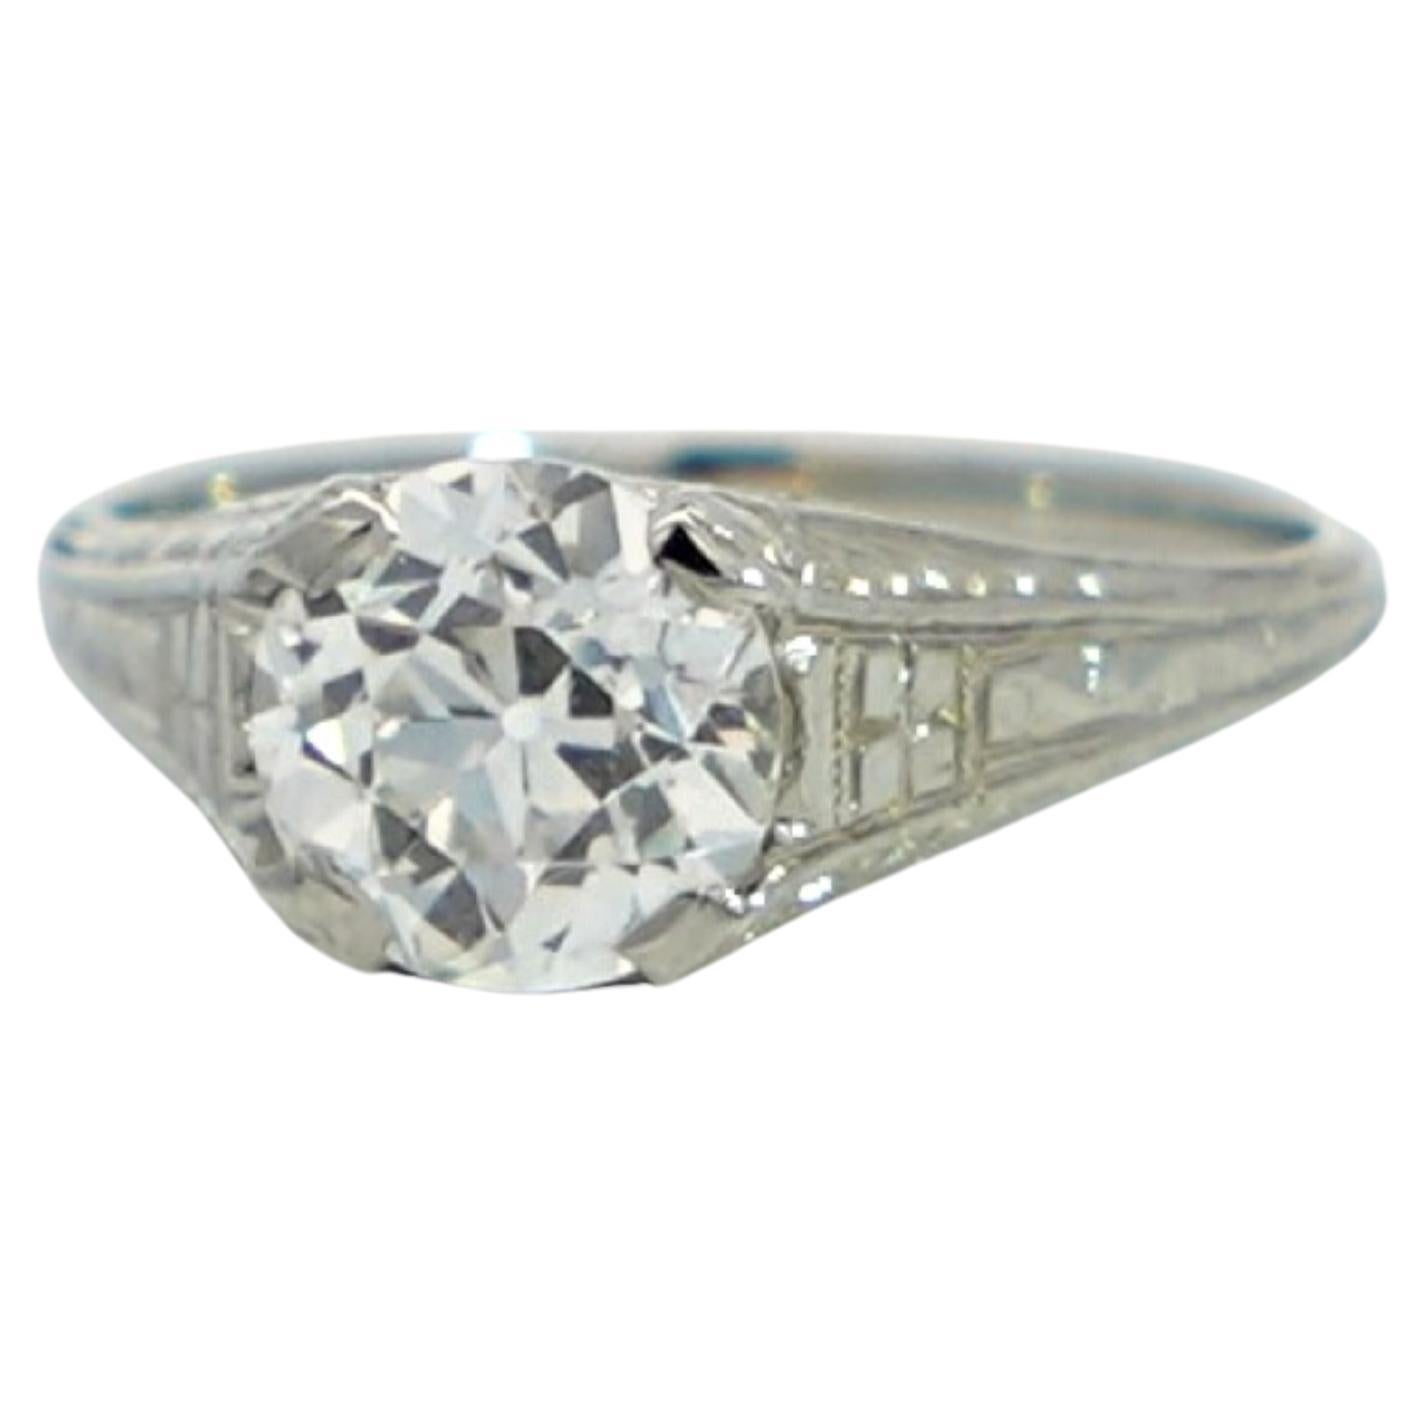 This vintage Art Deco engagement ring, crafted circa 1940, exudes timeless elegance and sophistication. Made from exquisite 20K white gold, the ring features intricate filigree work on the band, adding a touch of vintage charm. The centerpiece of